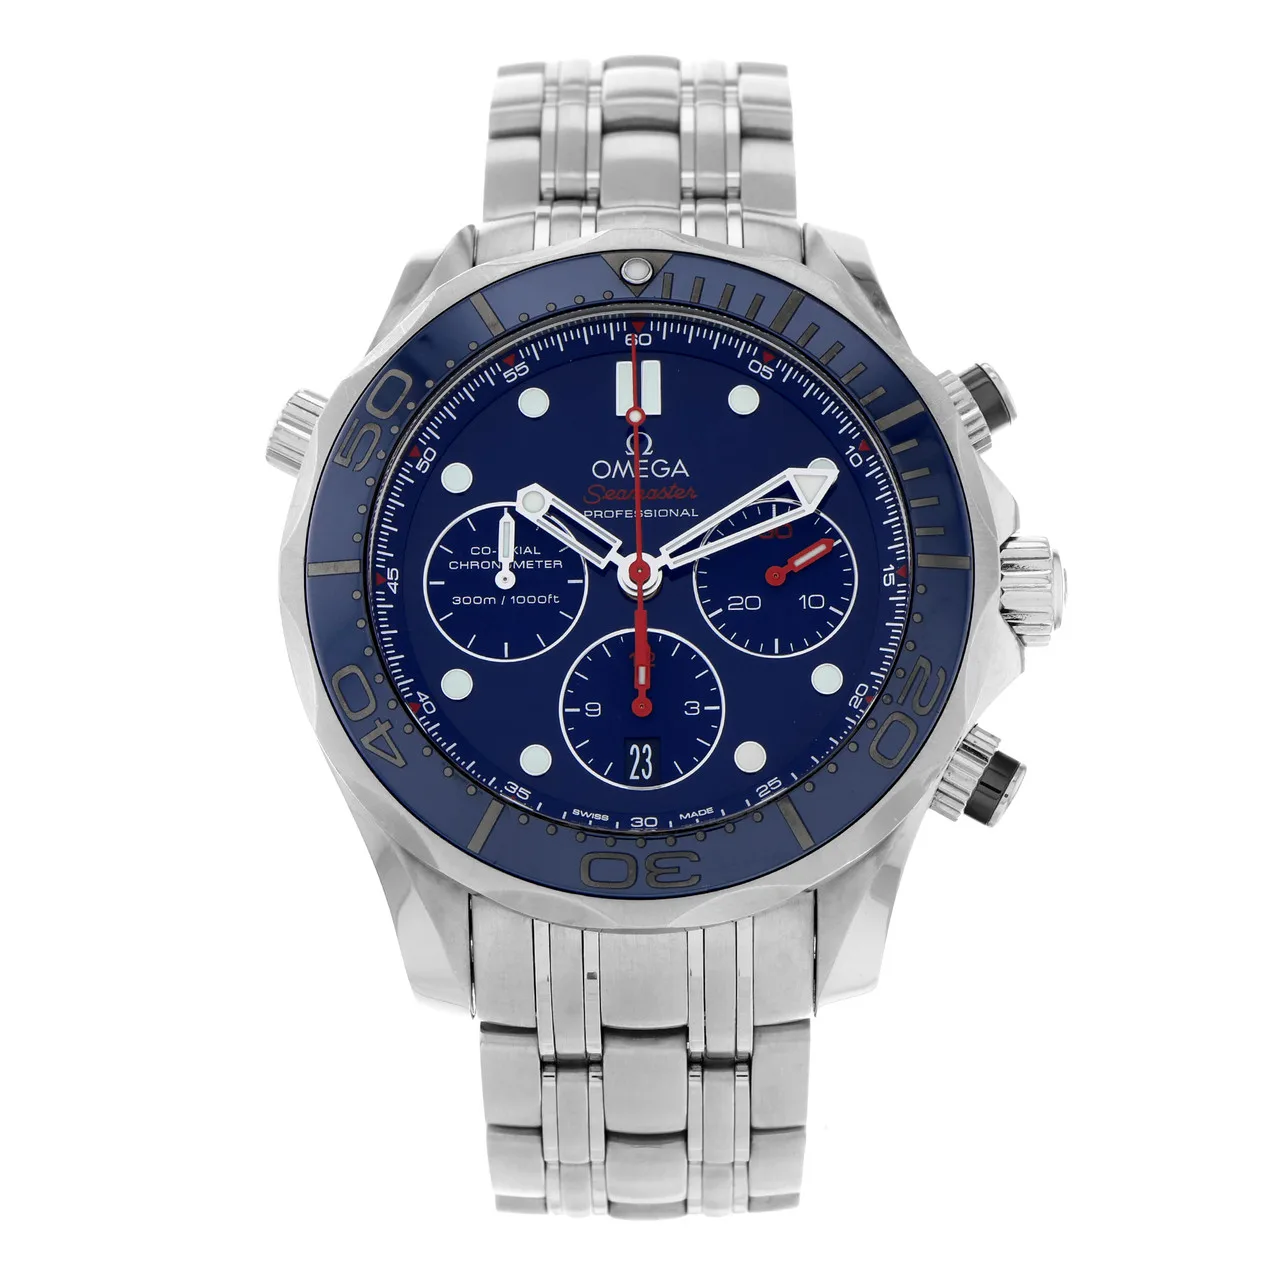 2017 Omega Seamaster Diver 300M Co-Axial 44 Chronograph Stainless Steel / Blue / Bracelet 212.30.44.50.03.001 Listing Image 1